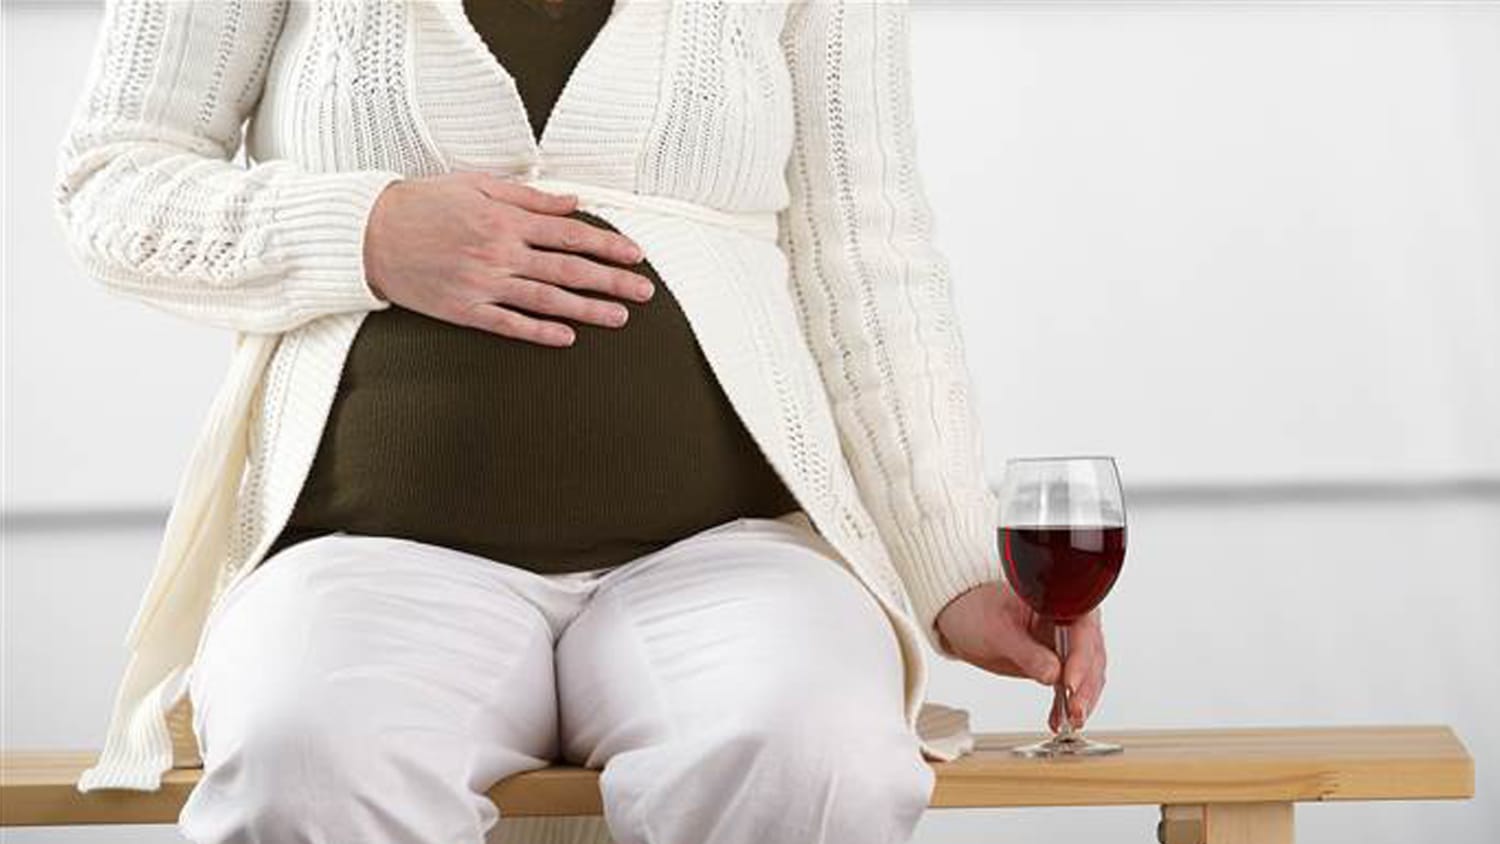 New study shows no harm from moderate drinking in pregnancy, but experts  urge caution